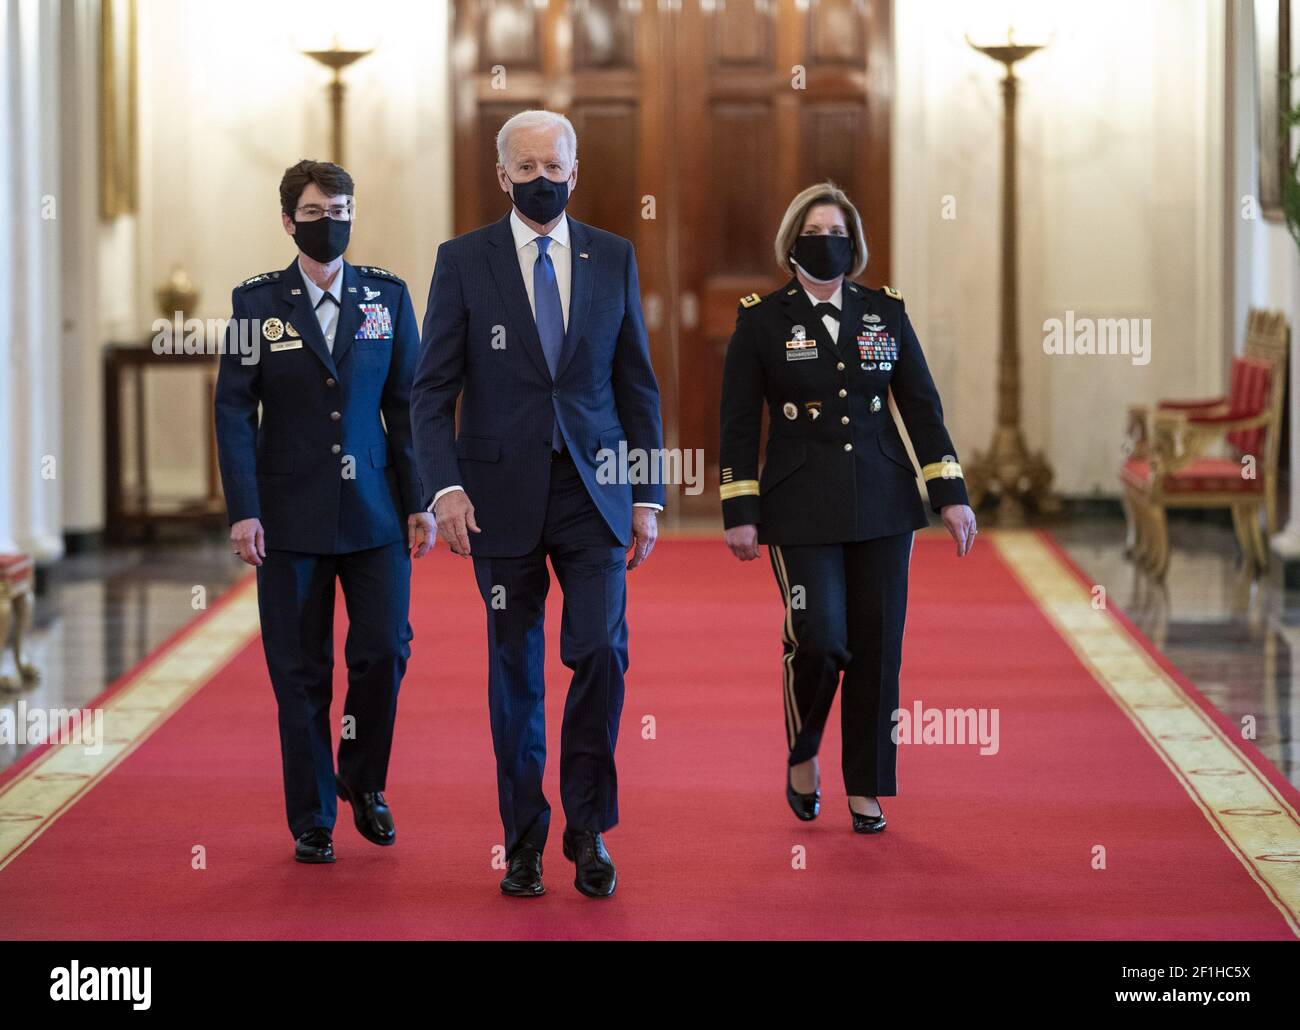 Washington, United States. 08th Mar, 2021. President Joe Biden walks with his Combatant Commander nominees, Air Force Gen. Jacqueline Van Ovost (L) and Army Lt. Gen. Laura Richardson as they arrives for their nomination announcement in the East Room at the White House in Washington, DC on Monday, March 8, 2021. Ovost, has been nominated to lead the Transportation Command and Richardson, has been nominated to lead military activities in Latin America at Southern Command. Photo by Kevin Dietsch/UPI Credit: UPI/Alamy Live News Stock Photo